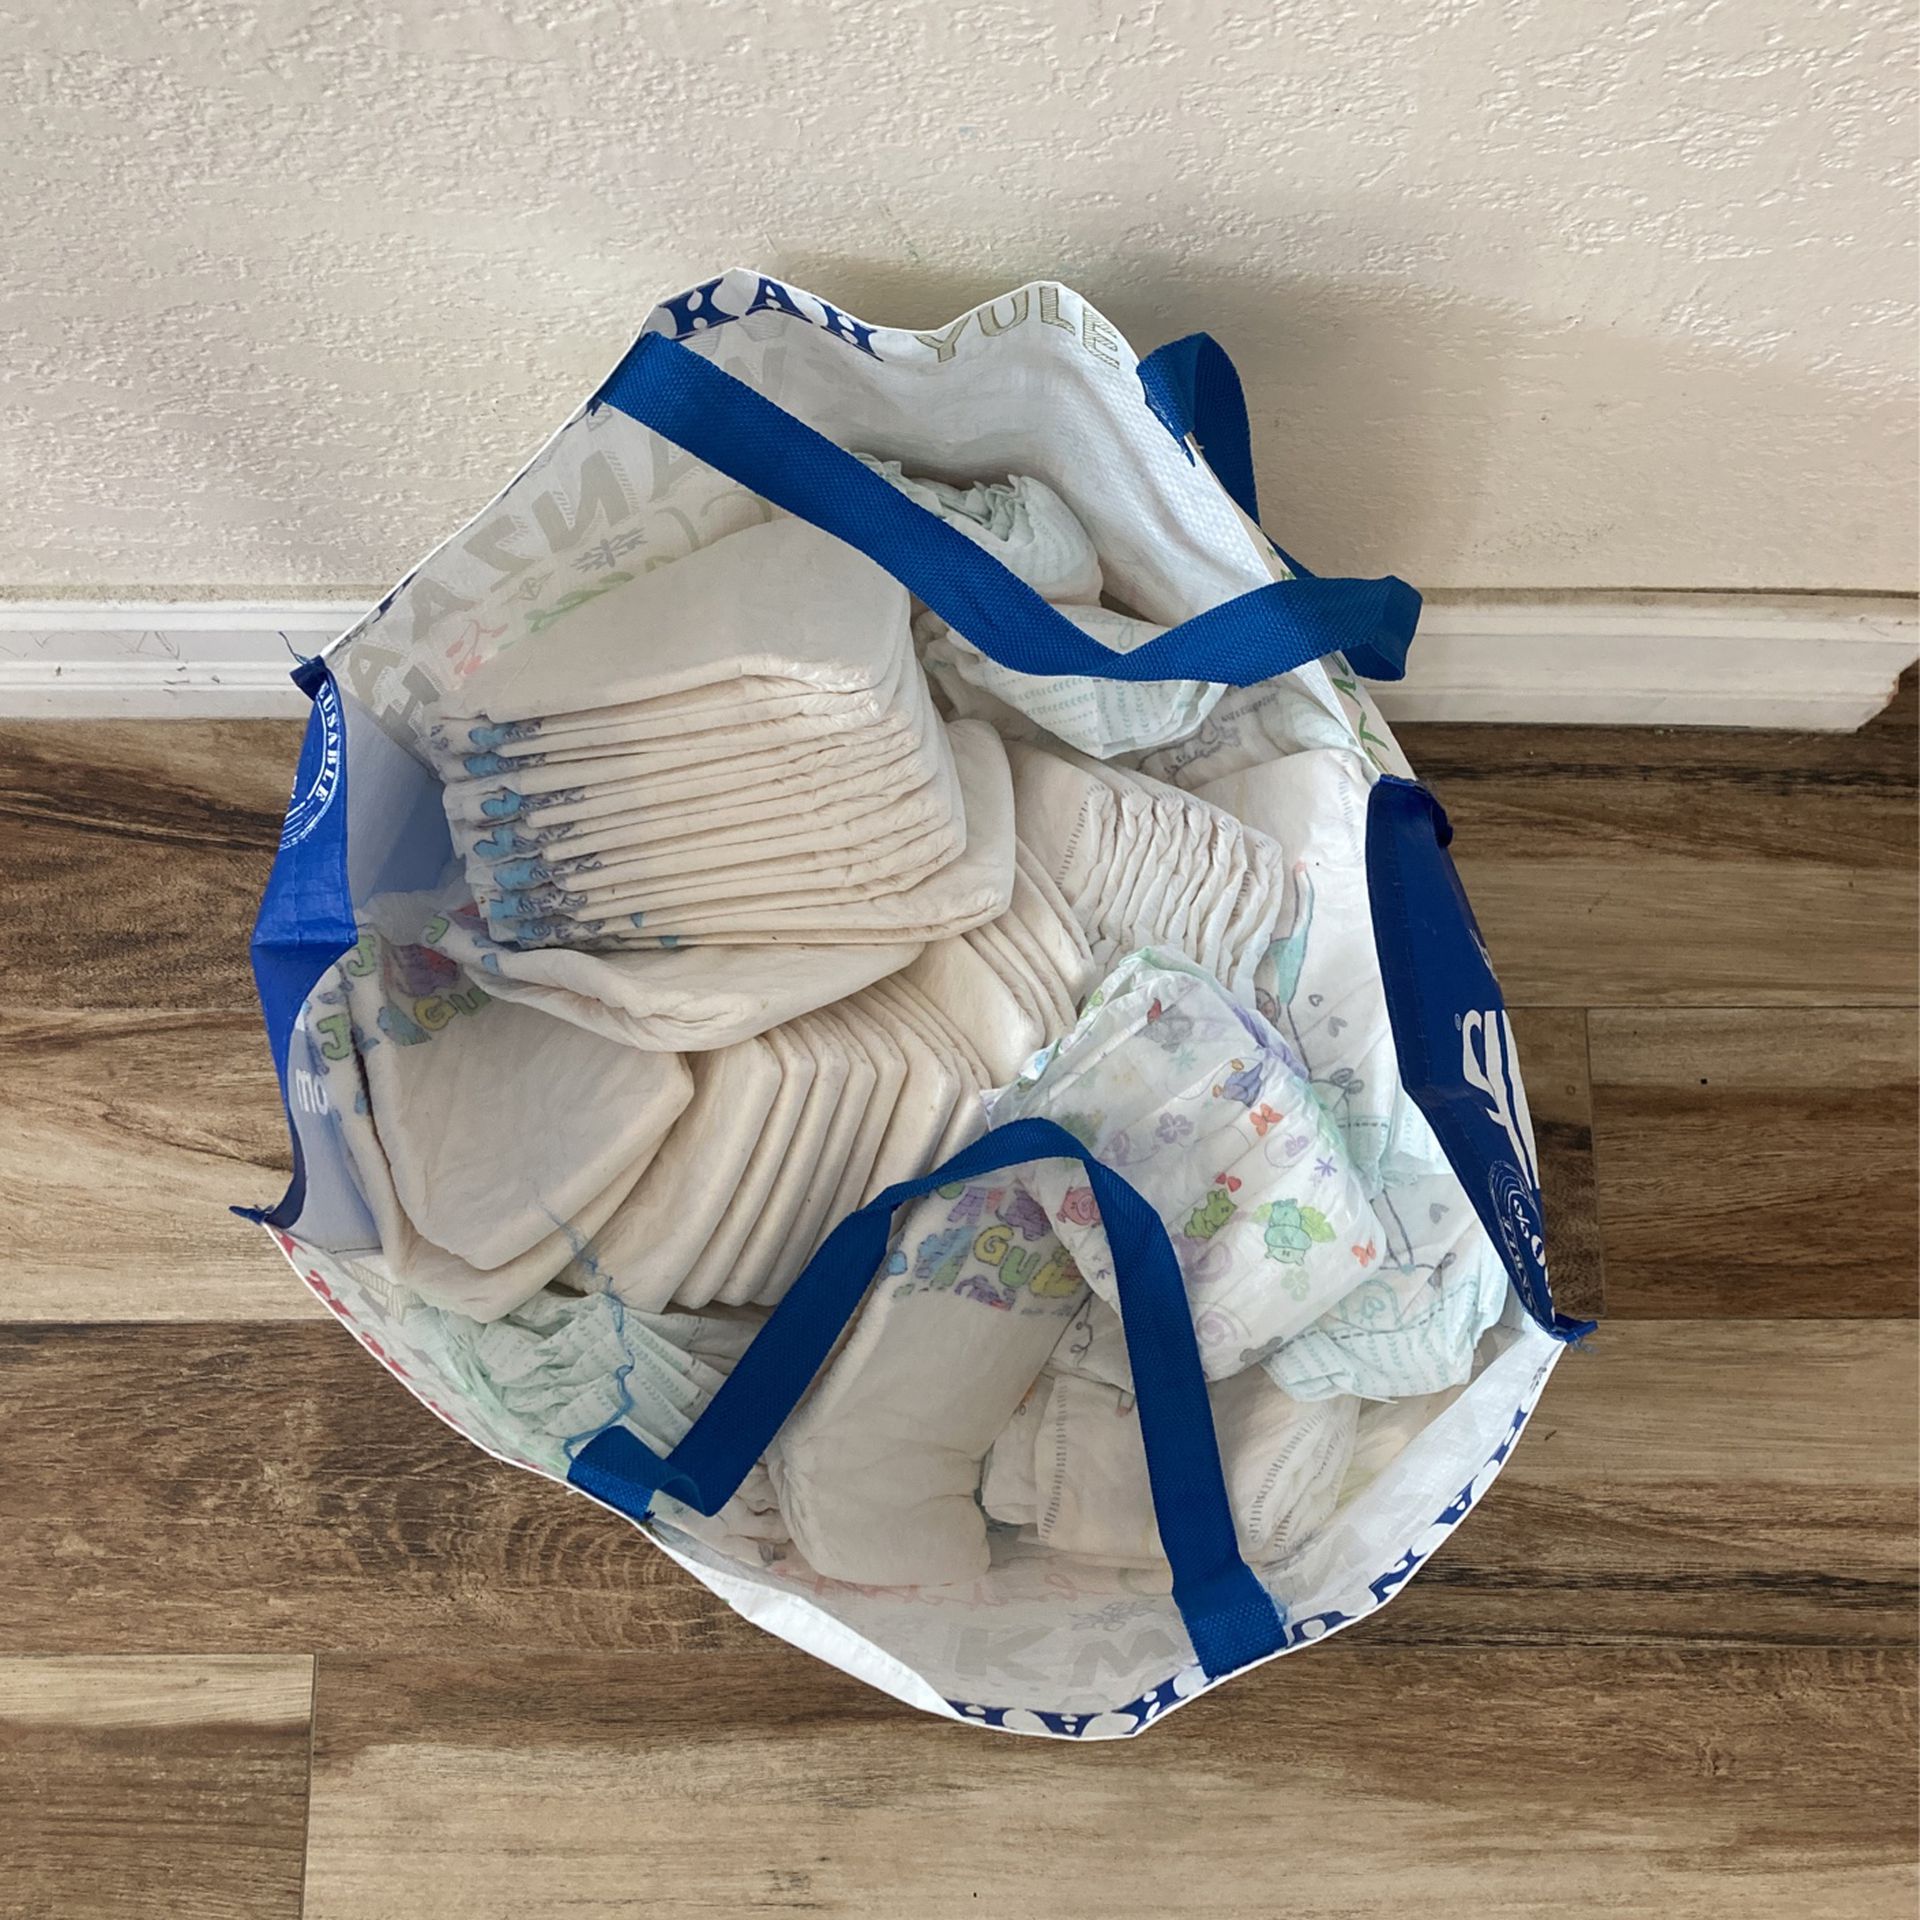 Bag Of Diapers For $10